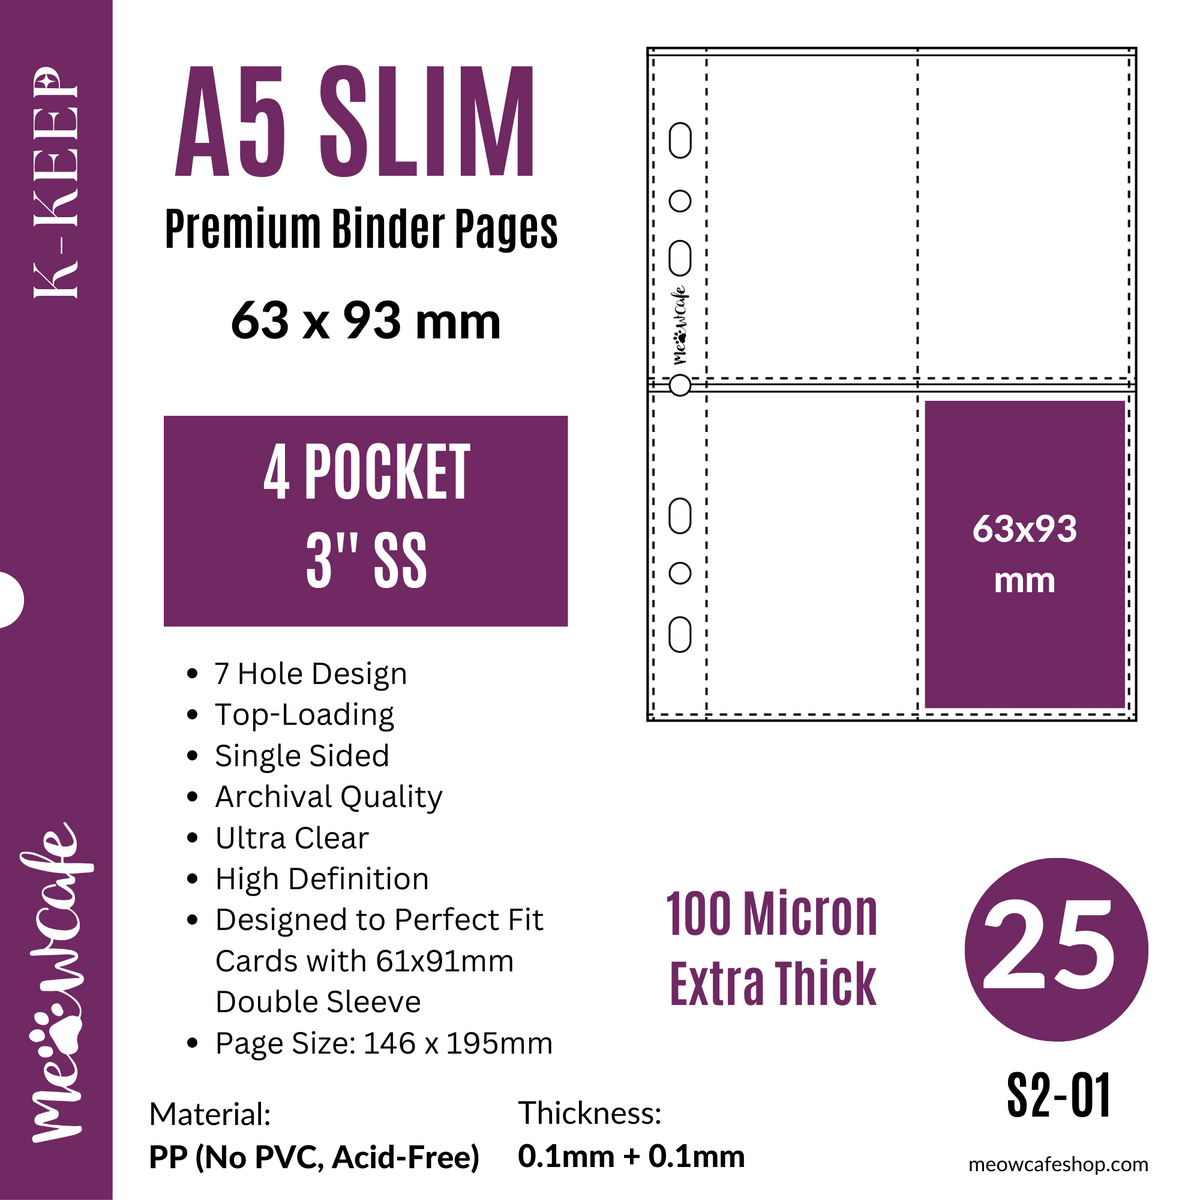 K-KEEP [A5 Slim] 4 Pocket - 63x93mm Single-Sided 7 Holes Premium Binder Pages, Double Sleeve Perfect Fit, 100 Micron Thick, High Definition (Pack of 25) S2-01